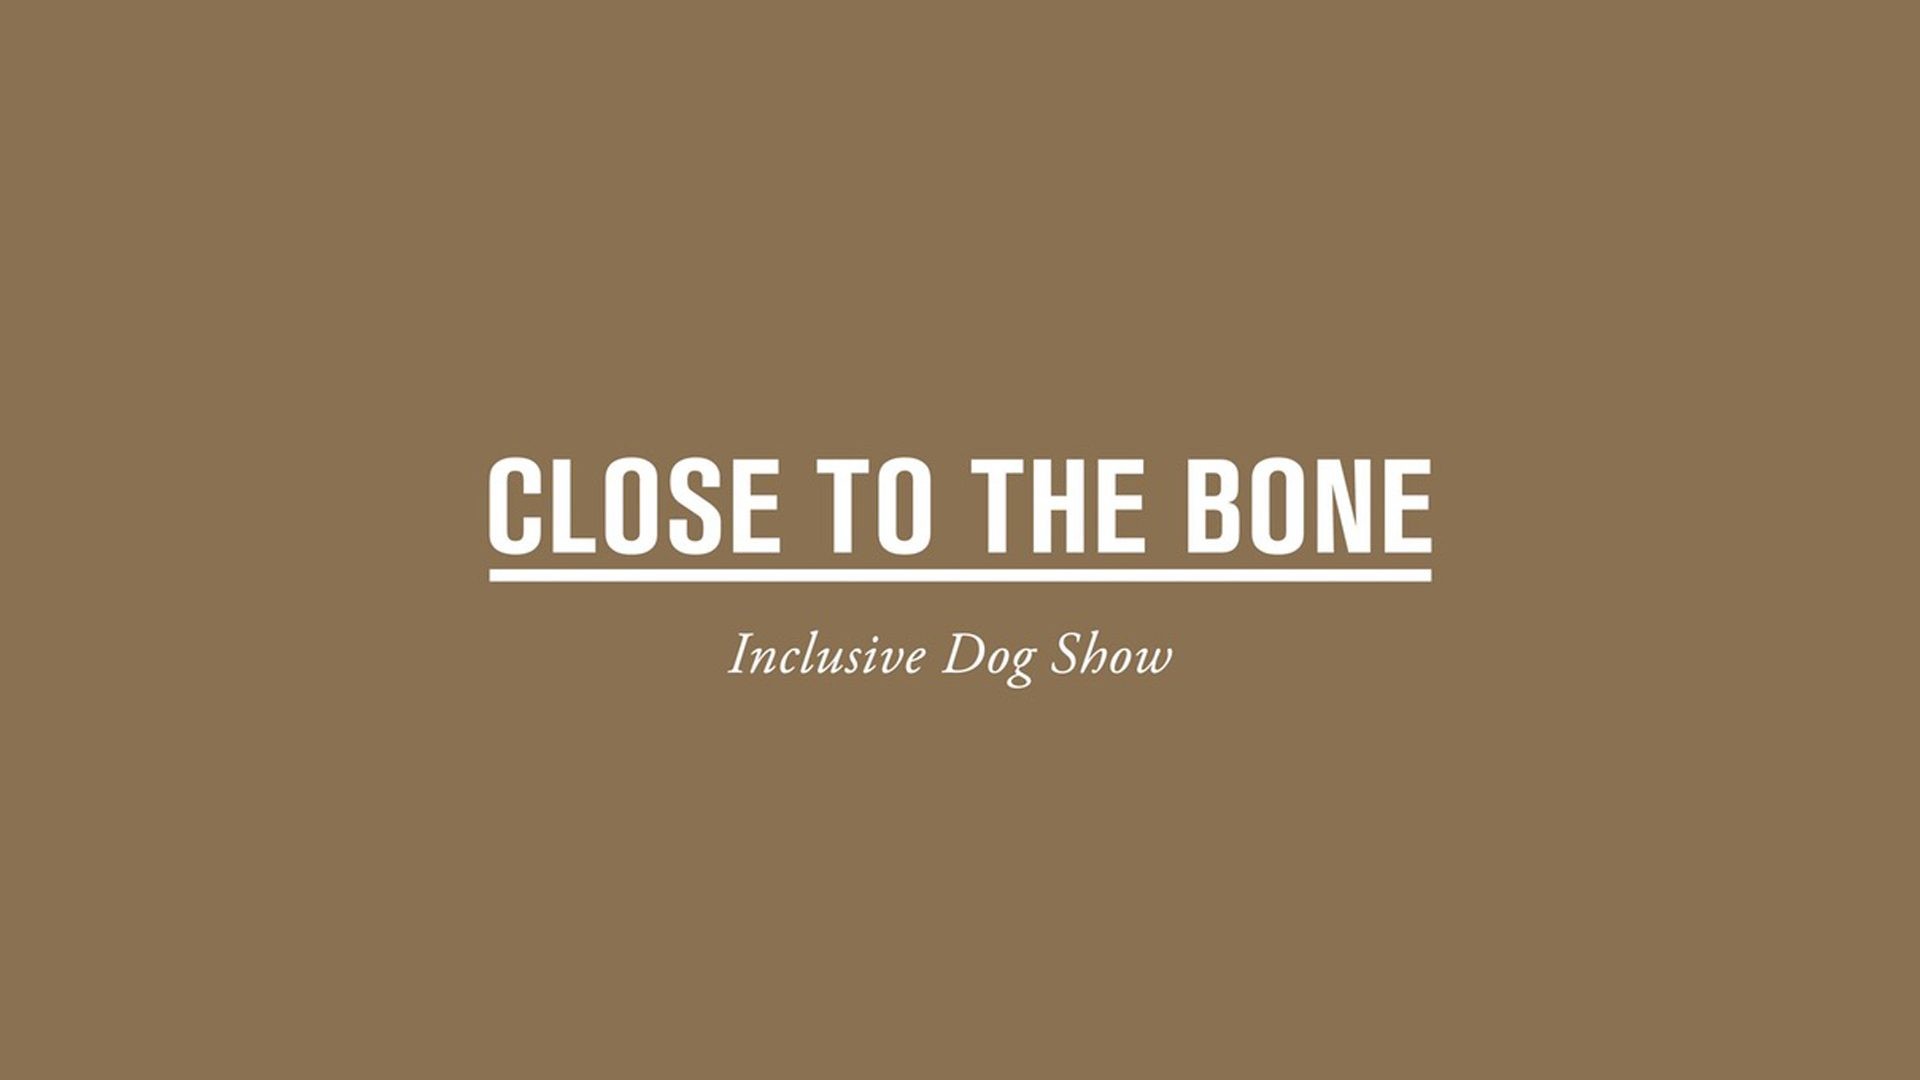 1920x1080 The inclusive dog show for city dwelling dogs